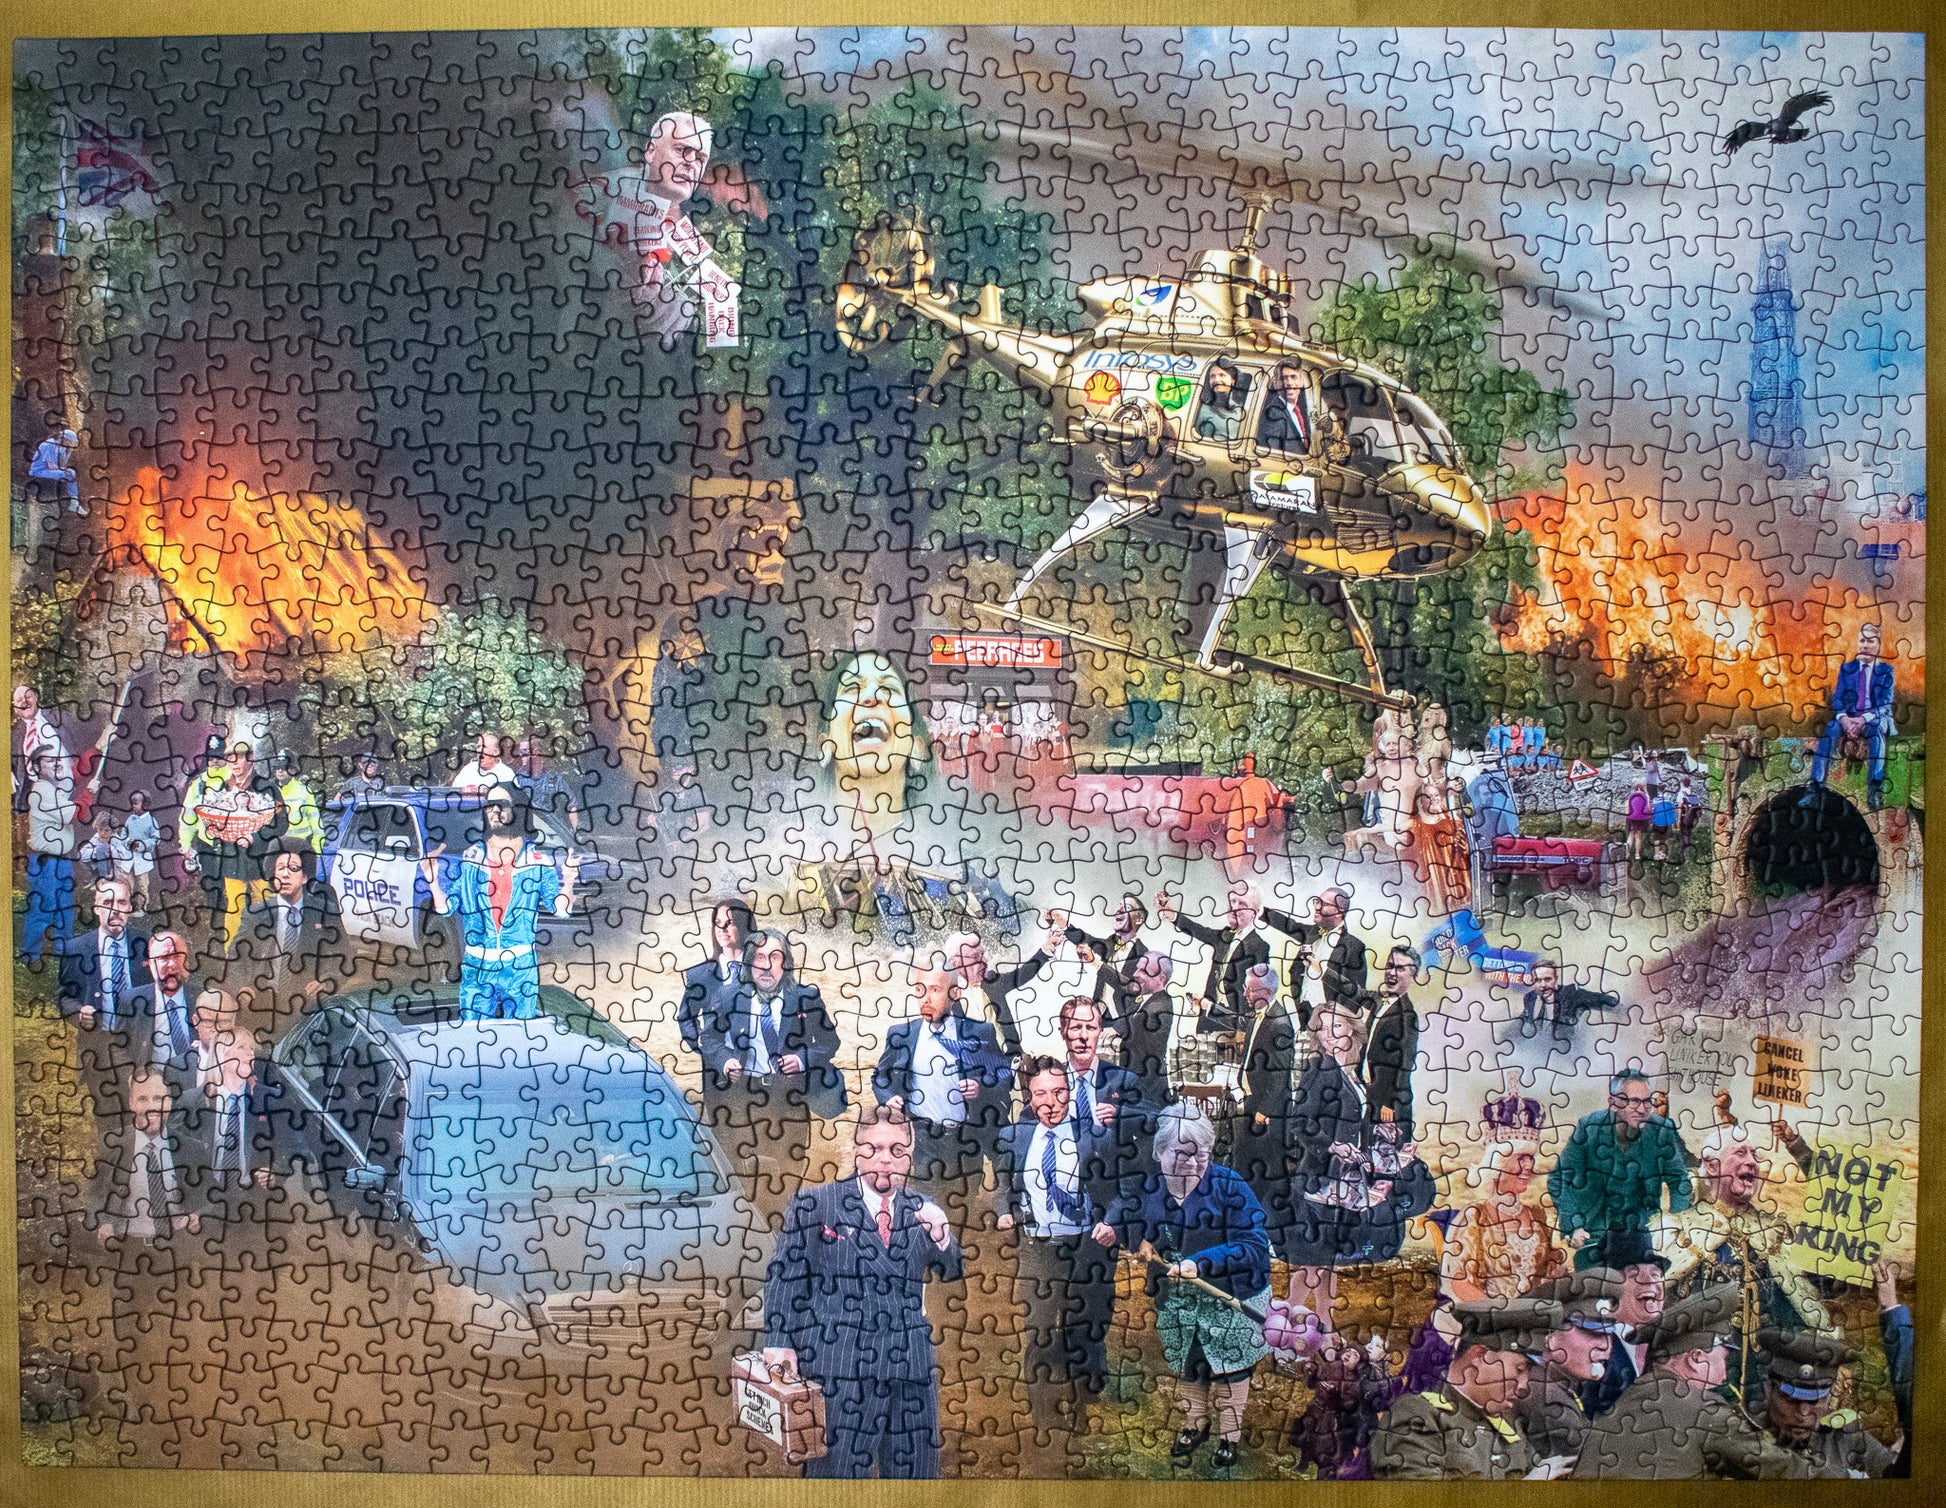 Cold War Steve '2023' Special Edition 1000 Piece Jigsaw Puzzle